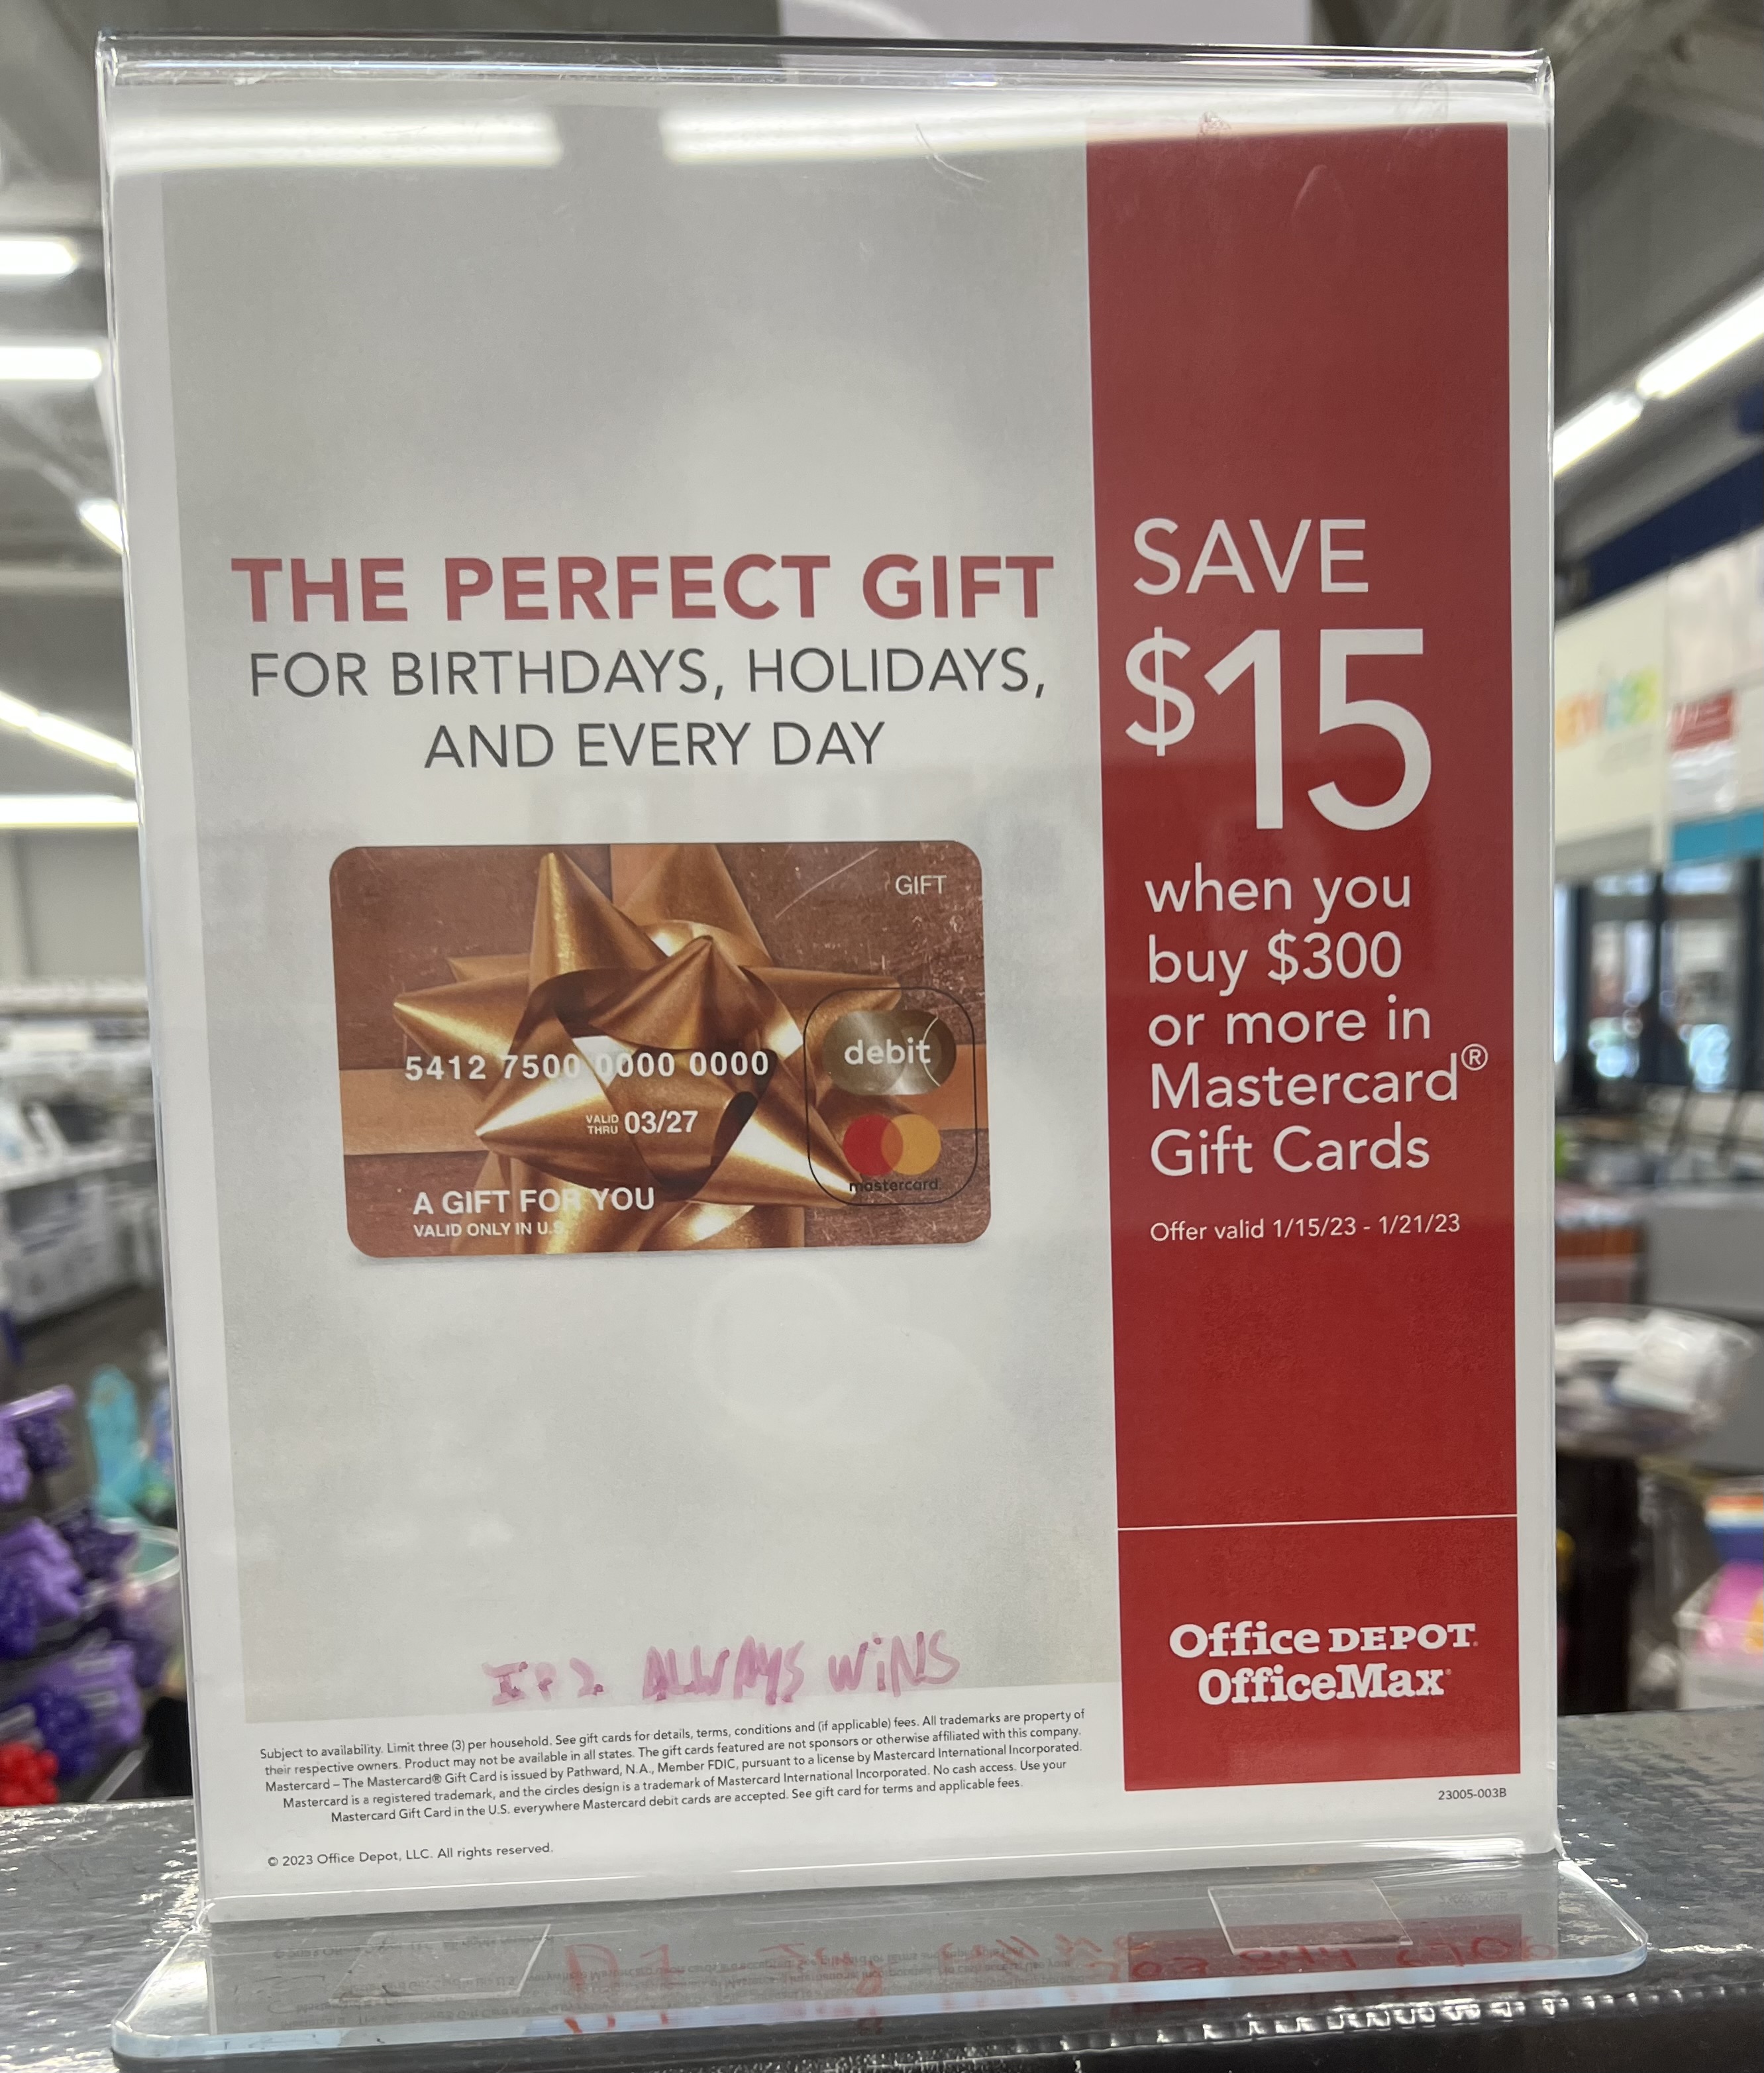 At Office Depot - Instant $15 Discount on Mastercard Gift Cards at Office Depot & OfficeMax w/ $300 purchase 1/15 - 1/21